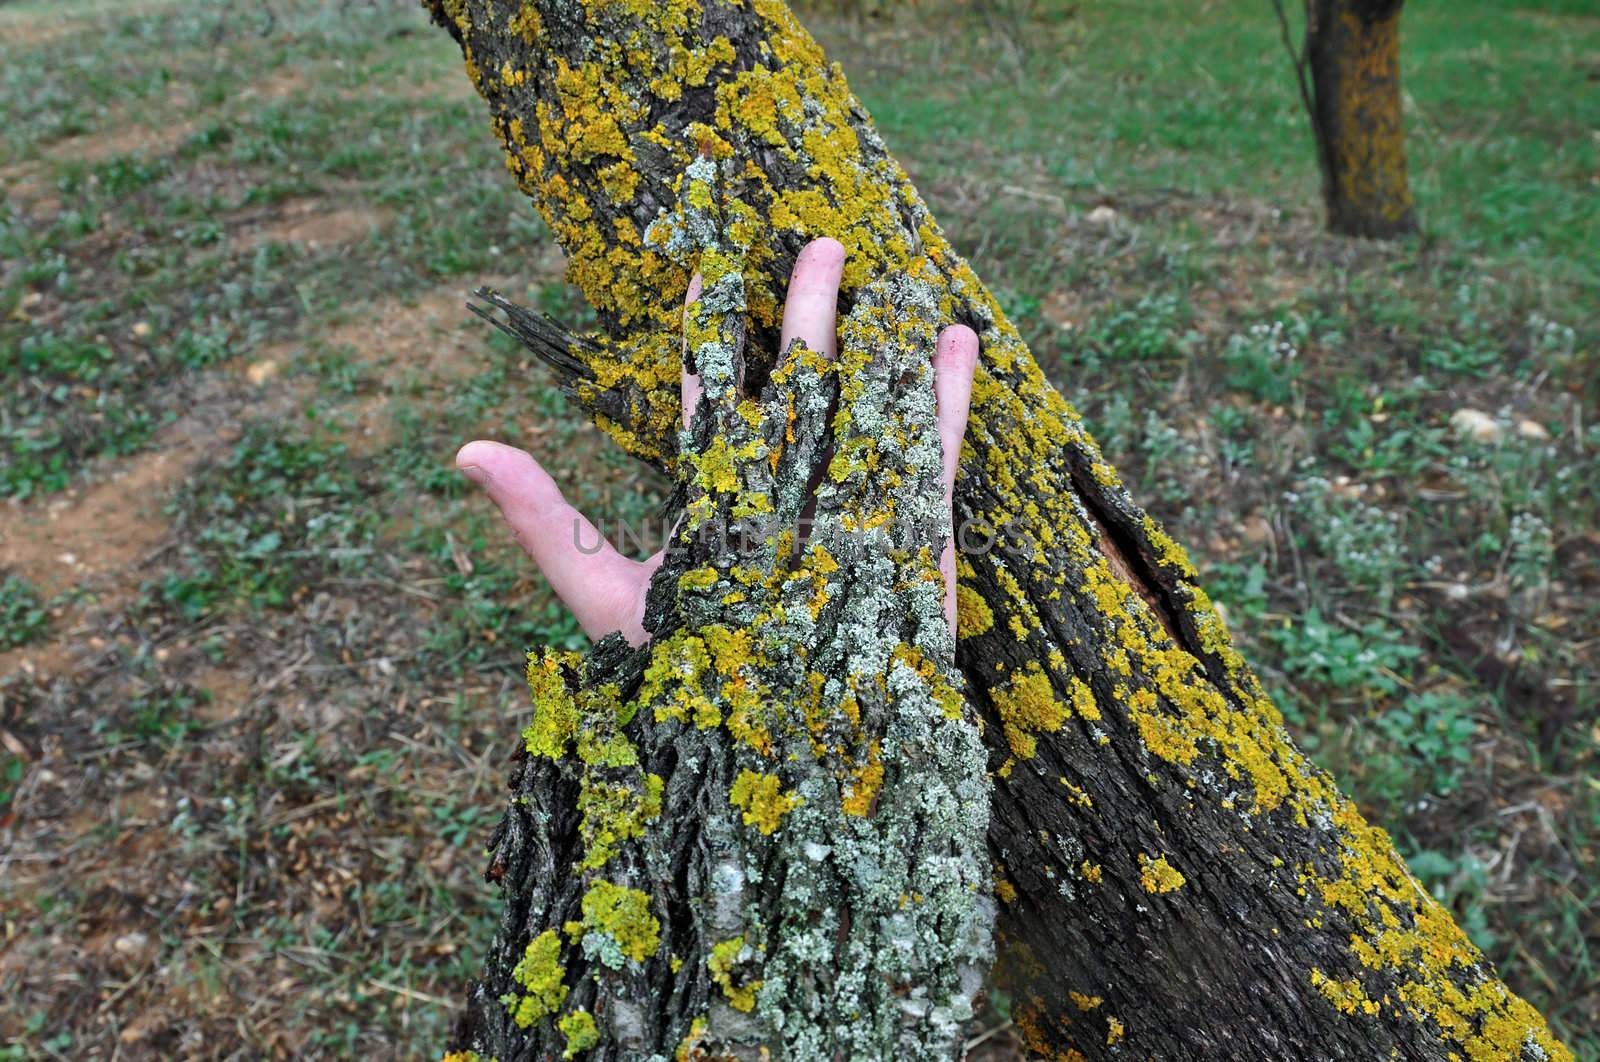 Human hand covered with bark peel touching a tree trunk.